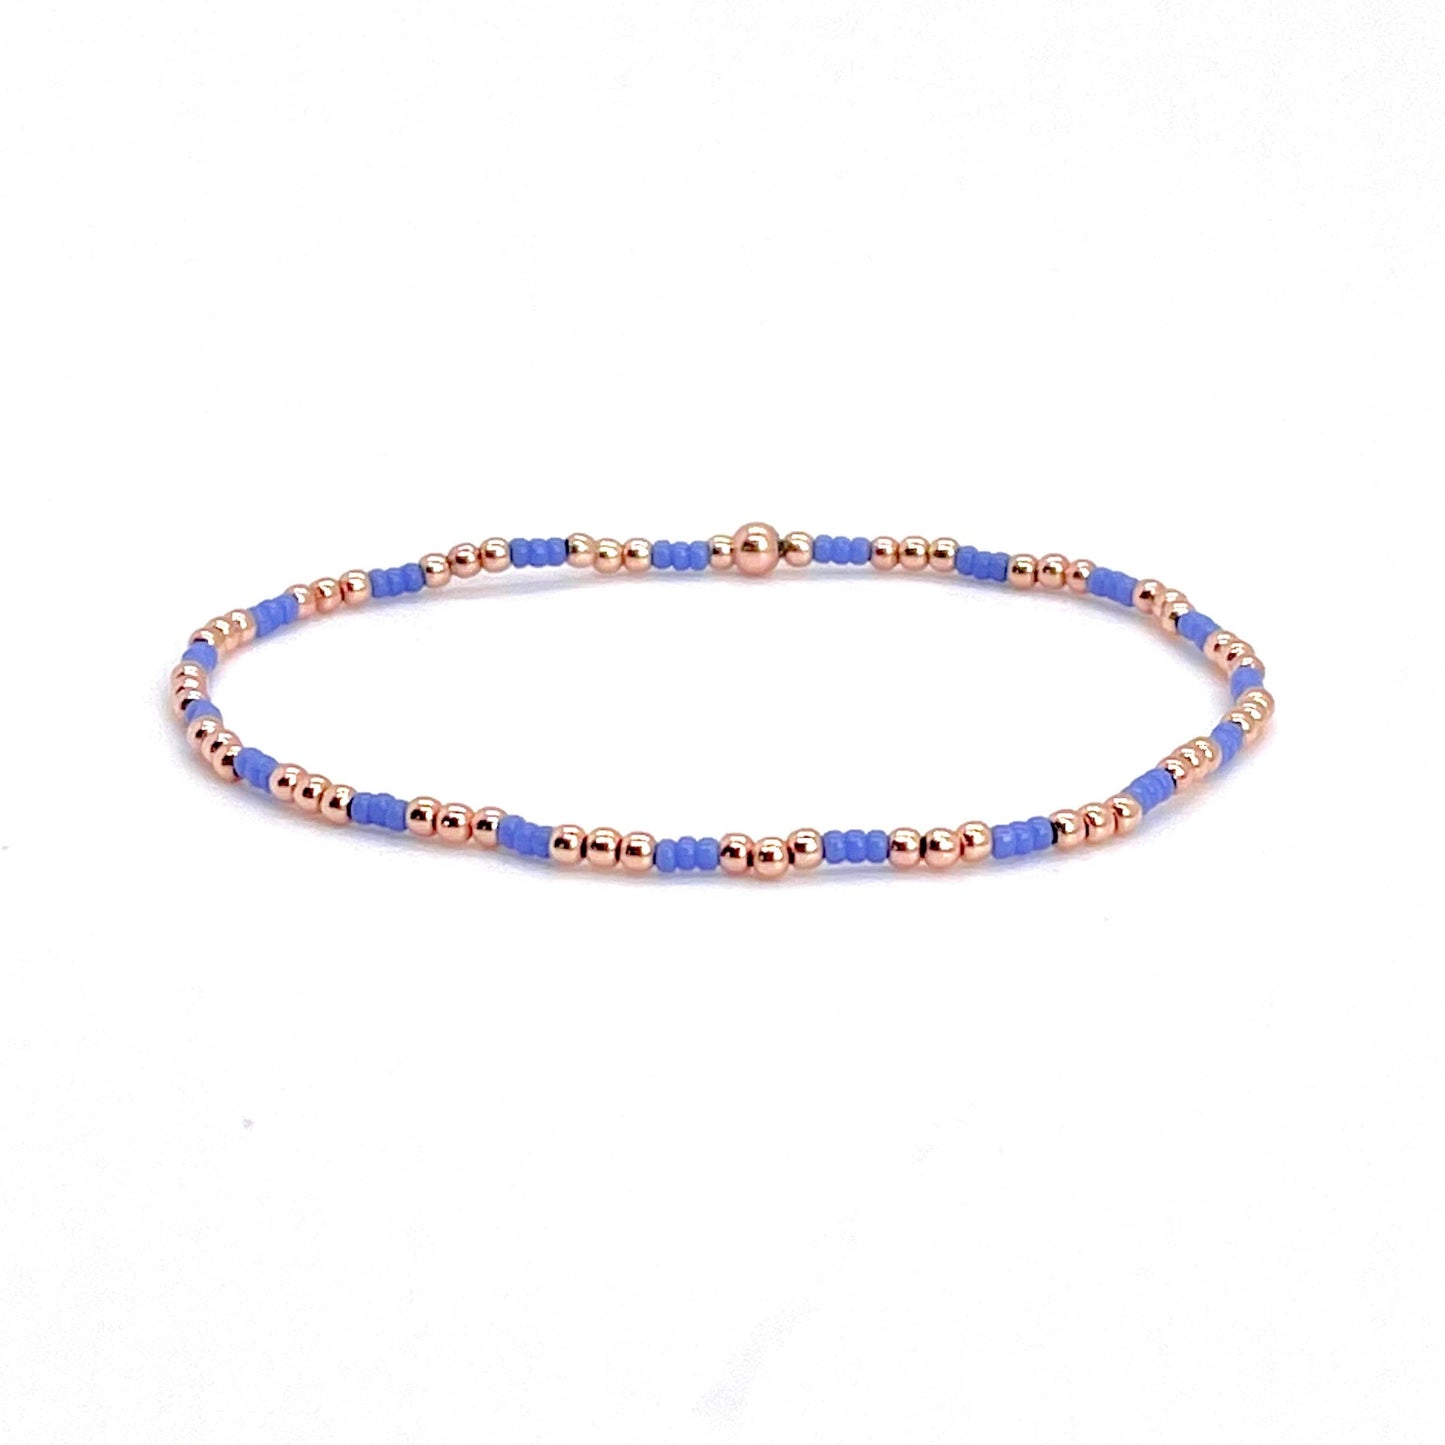 Rose gold bracelet for women with small periwinkle blue seed beads on stretch cord.